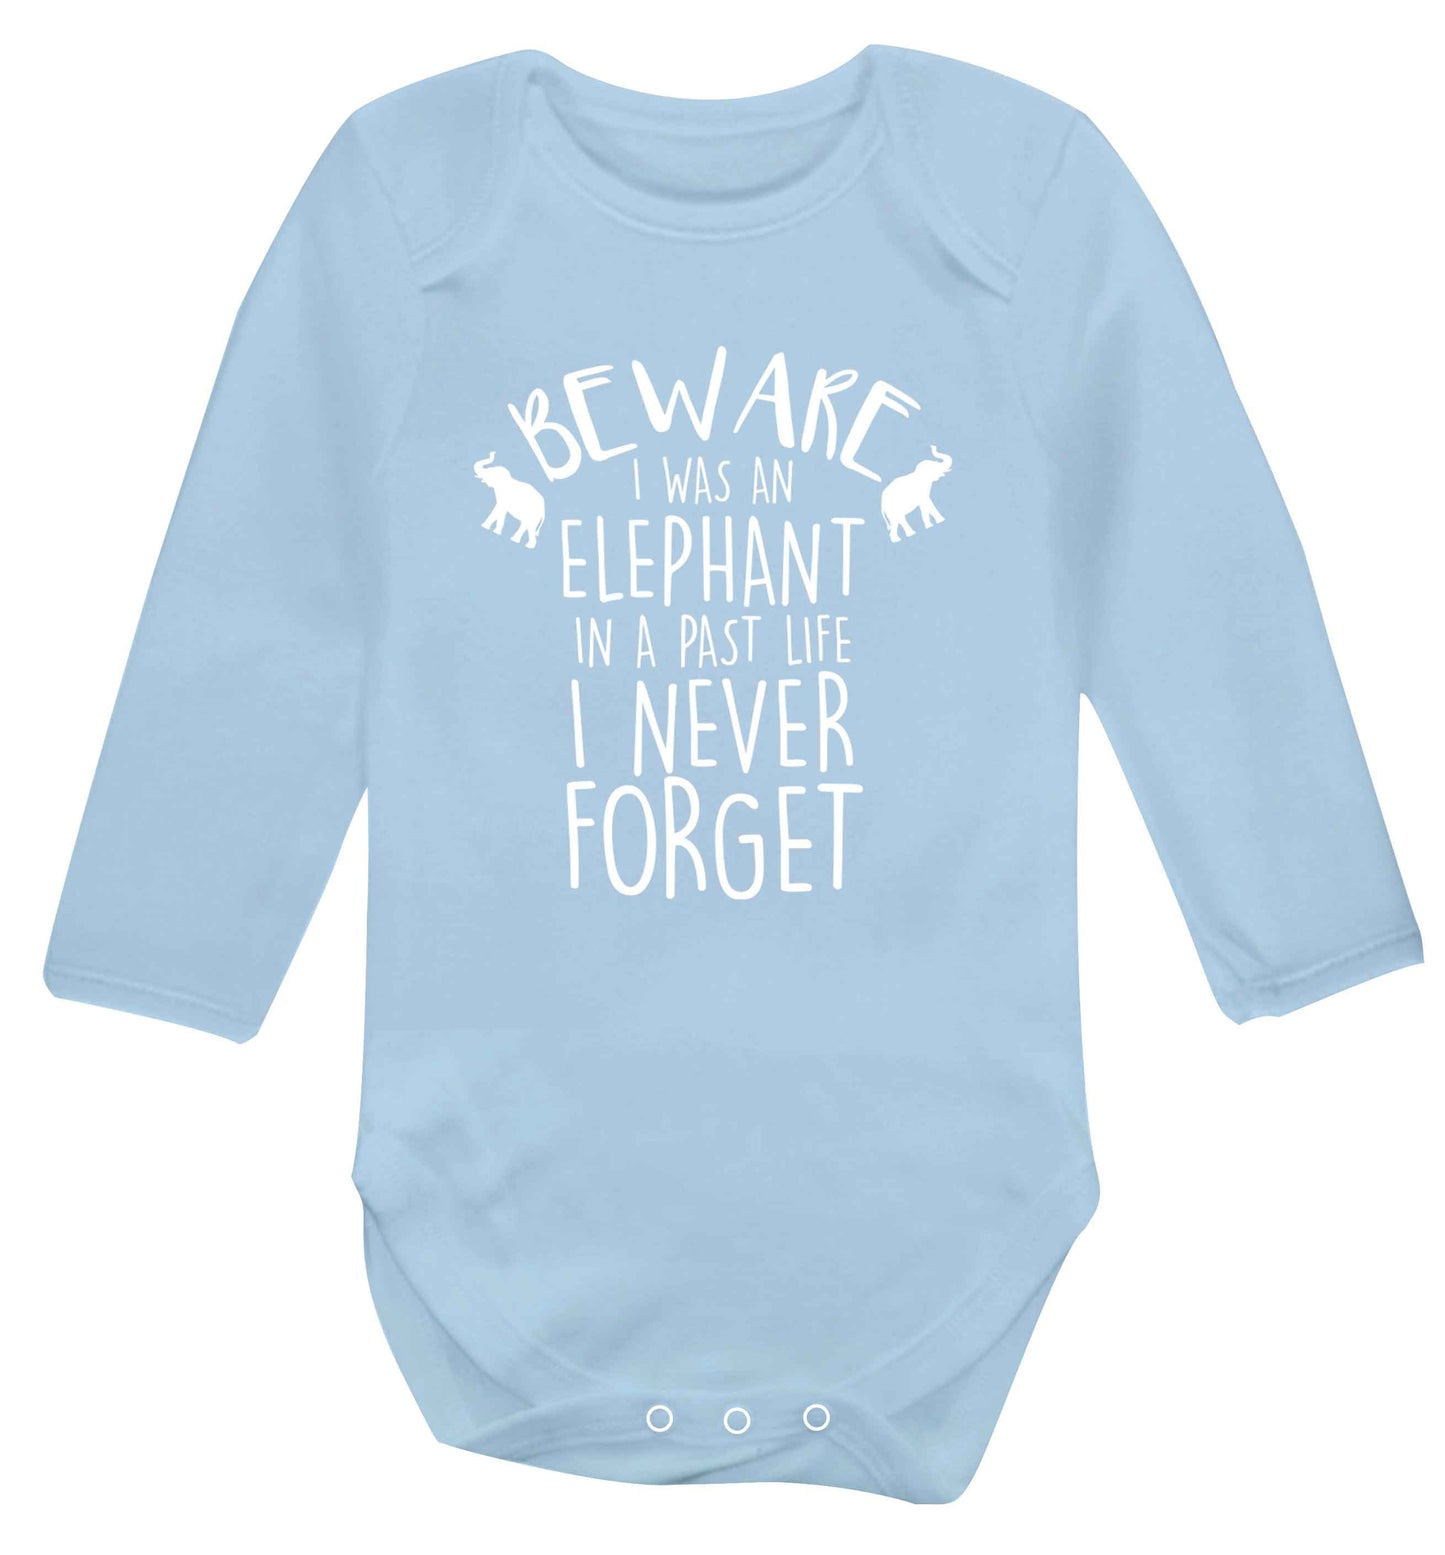 Beware I was an elephant in my past life I never forget Baby Vest long sleeved pale blue 6-12 months